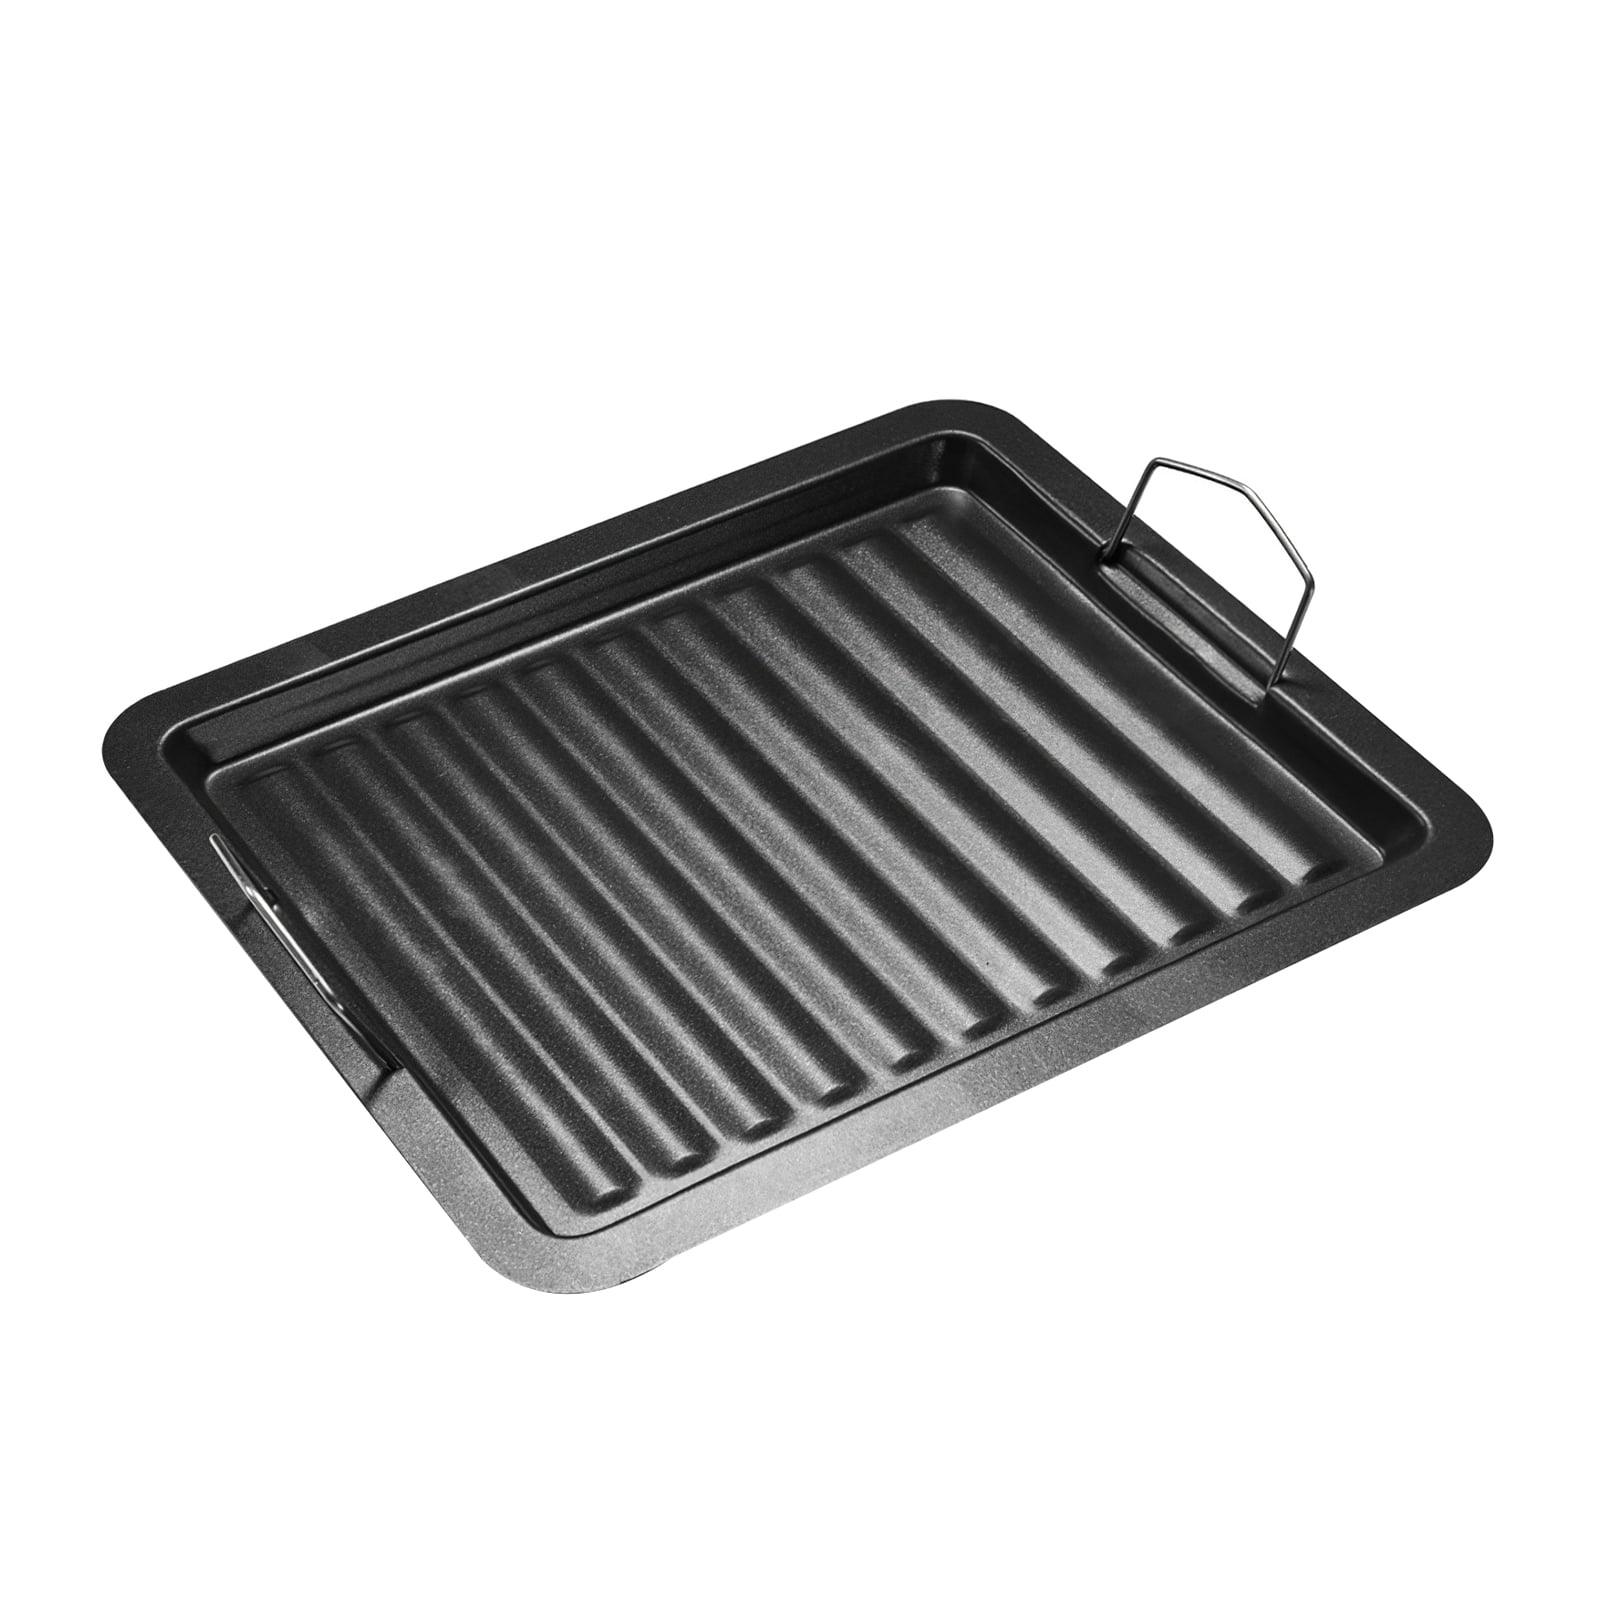 Oven Baking Frying Stainless Steel Non-Stick Barbecue BBQ Rack for Cooking,Pan 